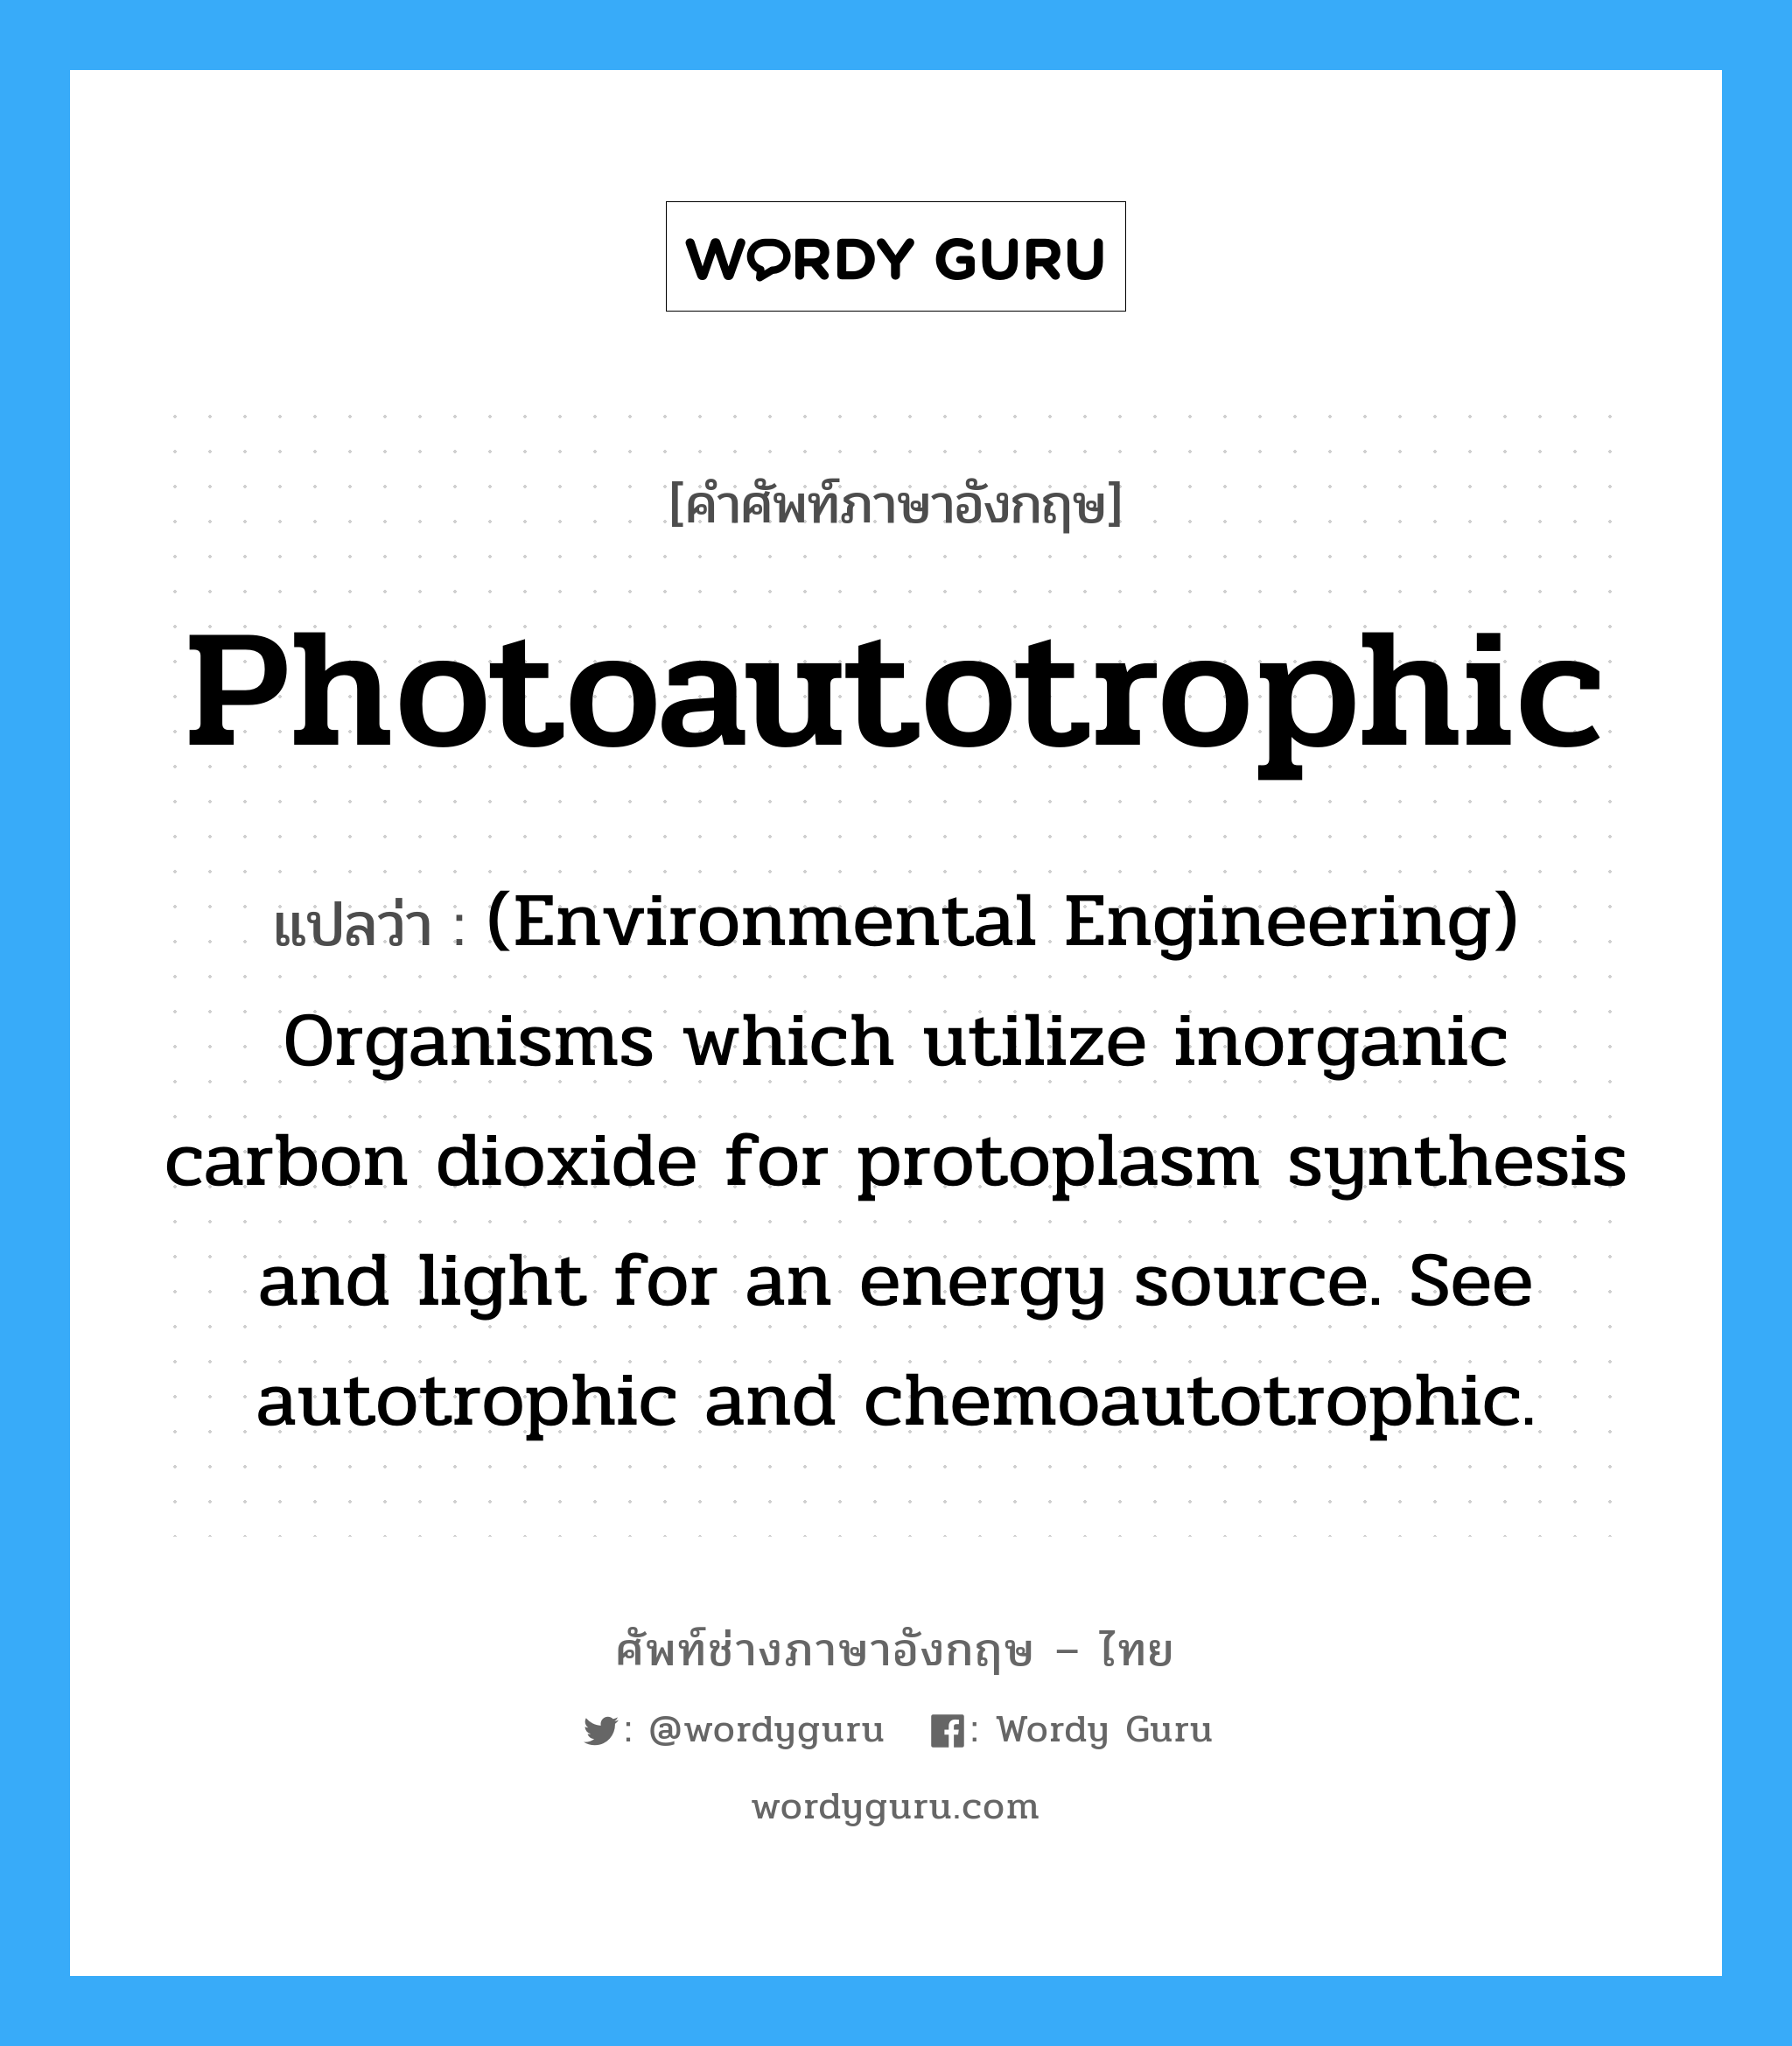 Photoautotrophic แปลว่า?, คำศัพท์ช่างภาษาอังกฤษ - ไทย Photoautotrophic คำศัพท์ภาษาอังกฤษ Photoautotrophic แปลว่า (Environmental Engineering) Organisms which utilize inorganic carbon dioxide for protoplasm synthesis and light for an energy source. See autotrophic and chemoautotrophic.